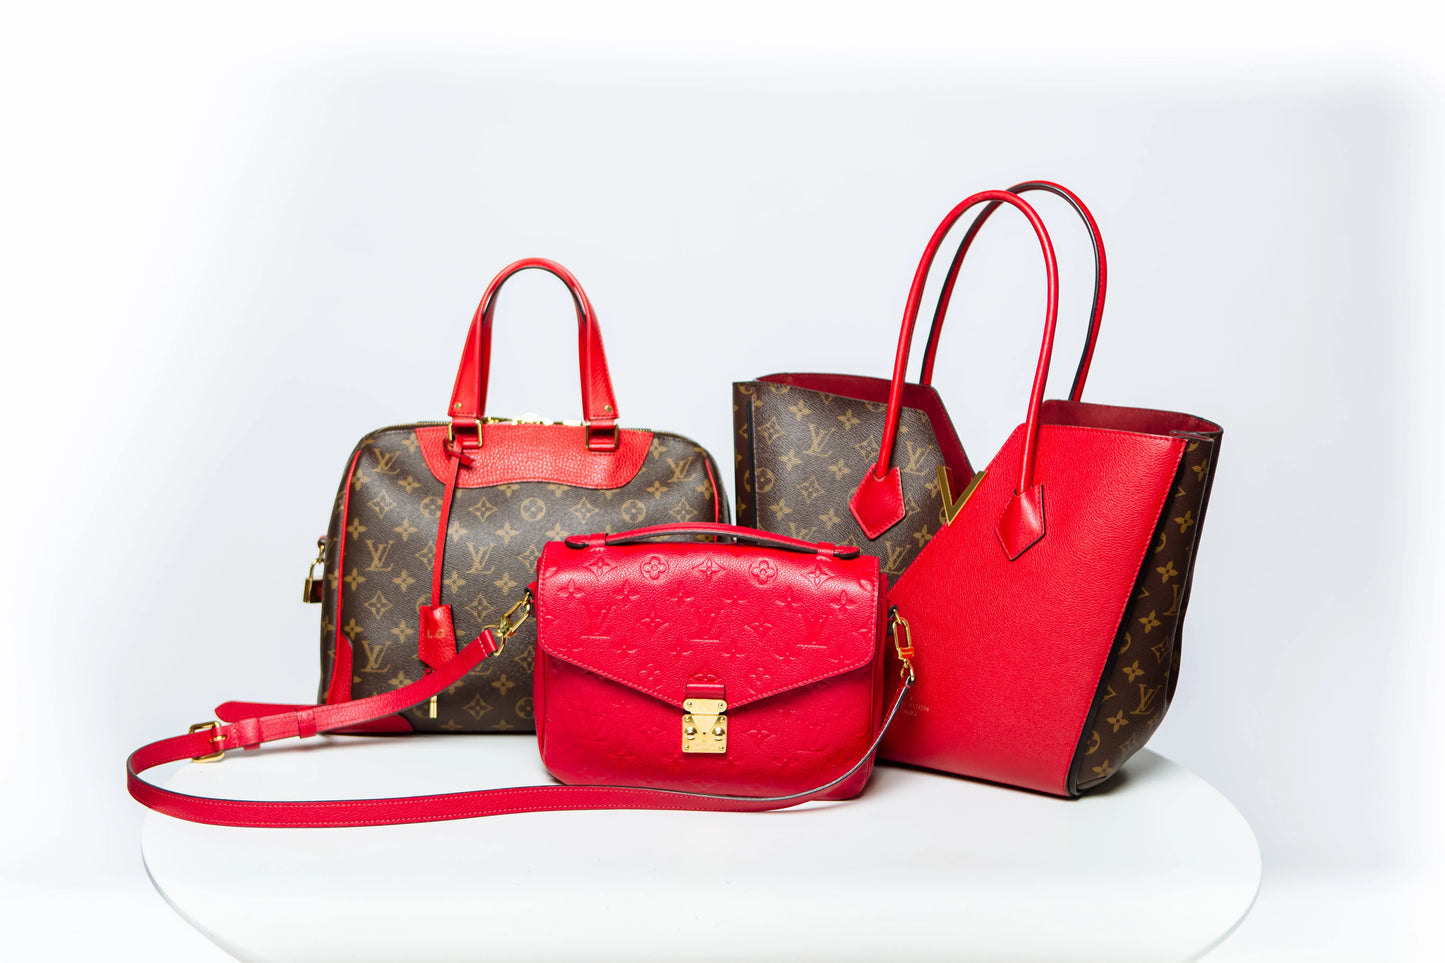 Top 10 Red Louis Vuitton Purses: Where To Buy a Red Designer Purse